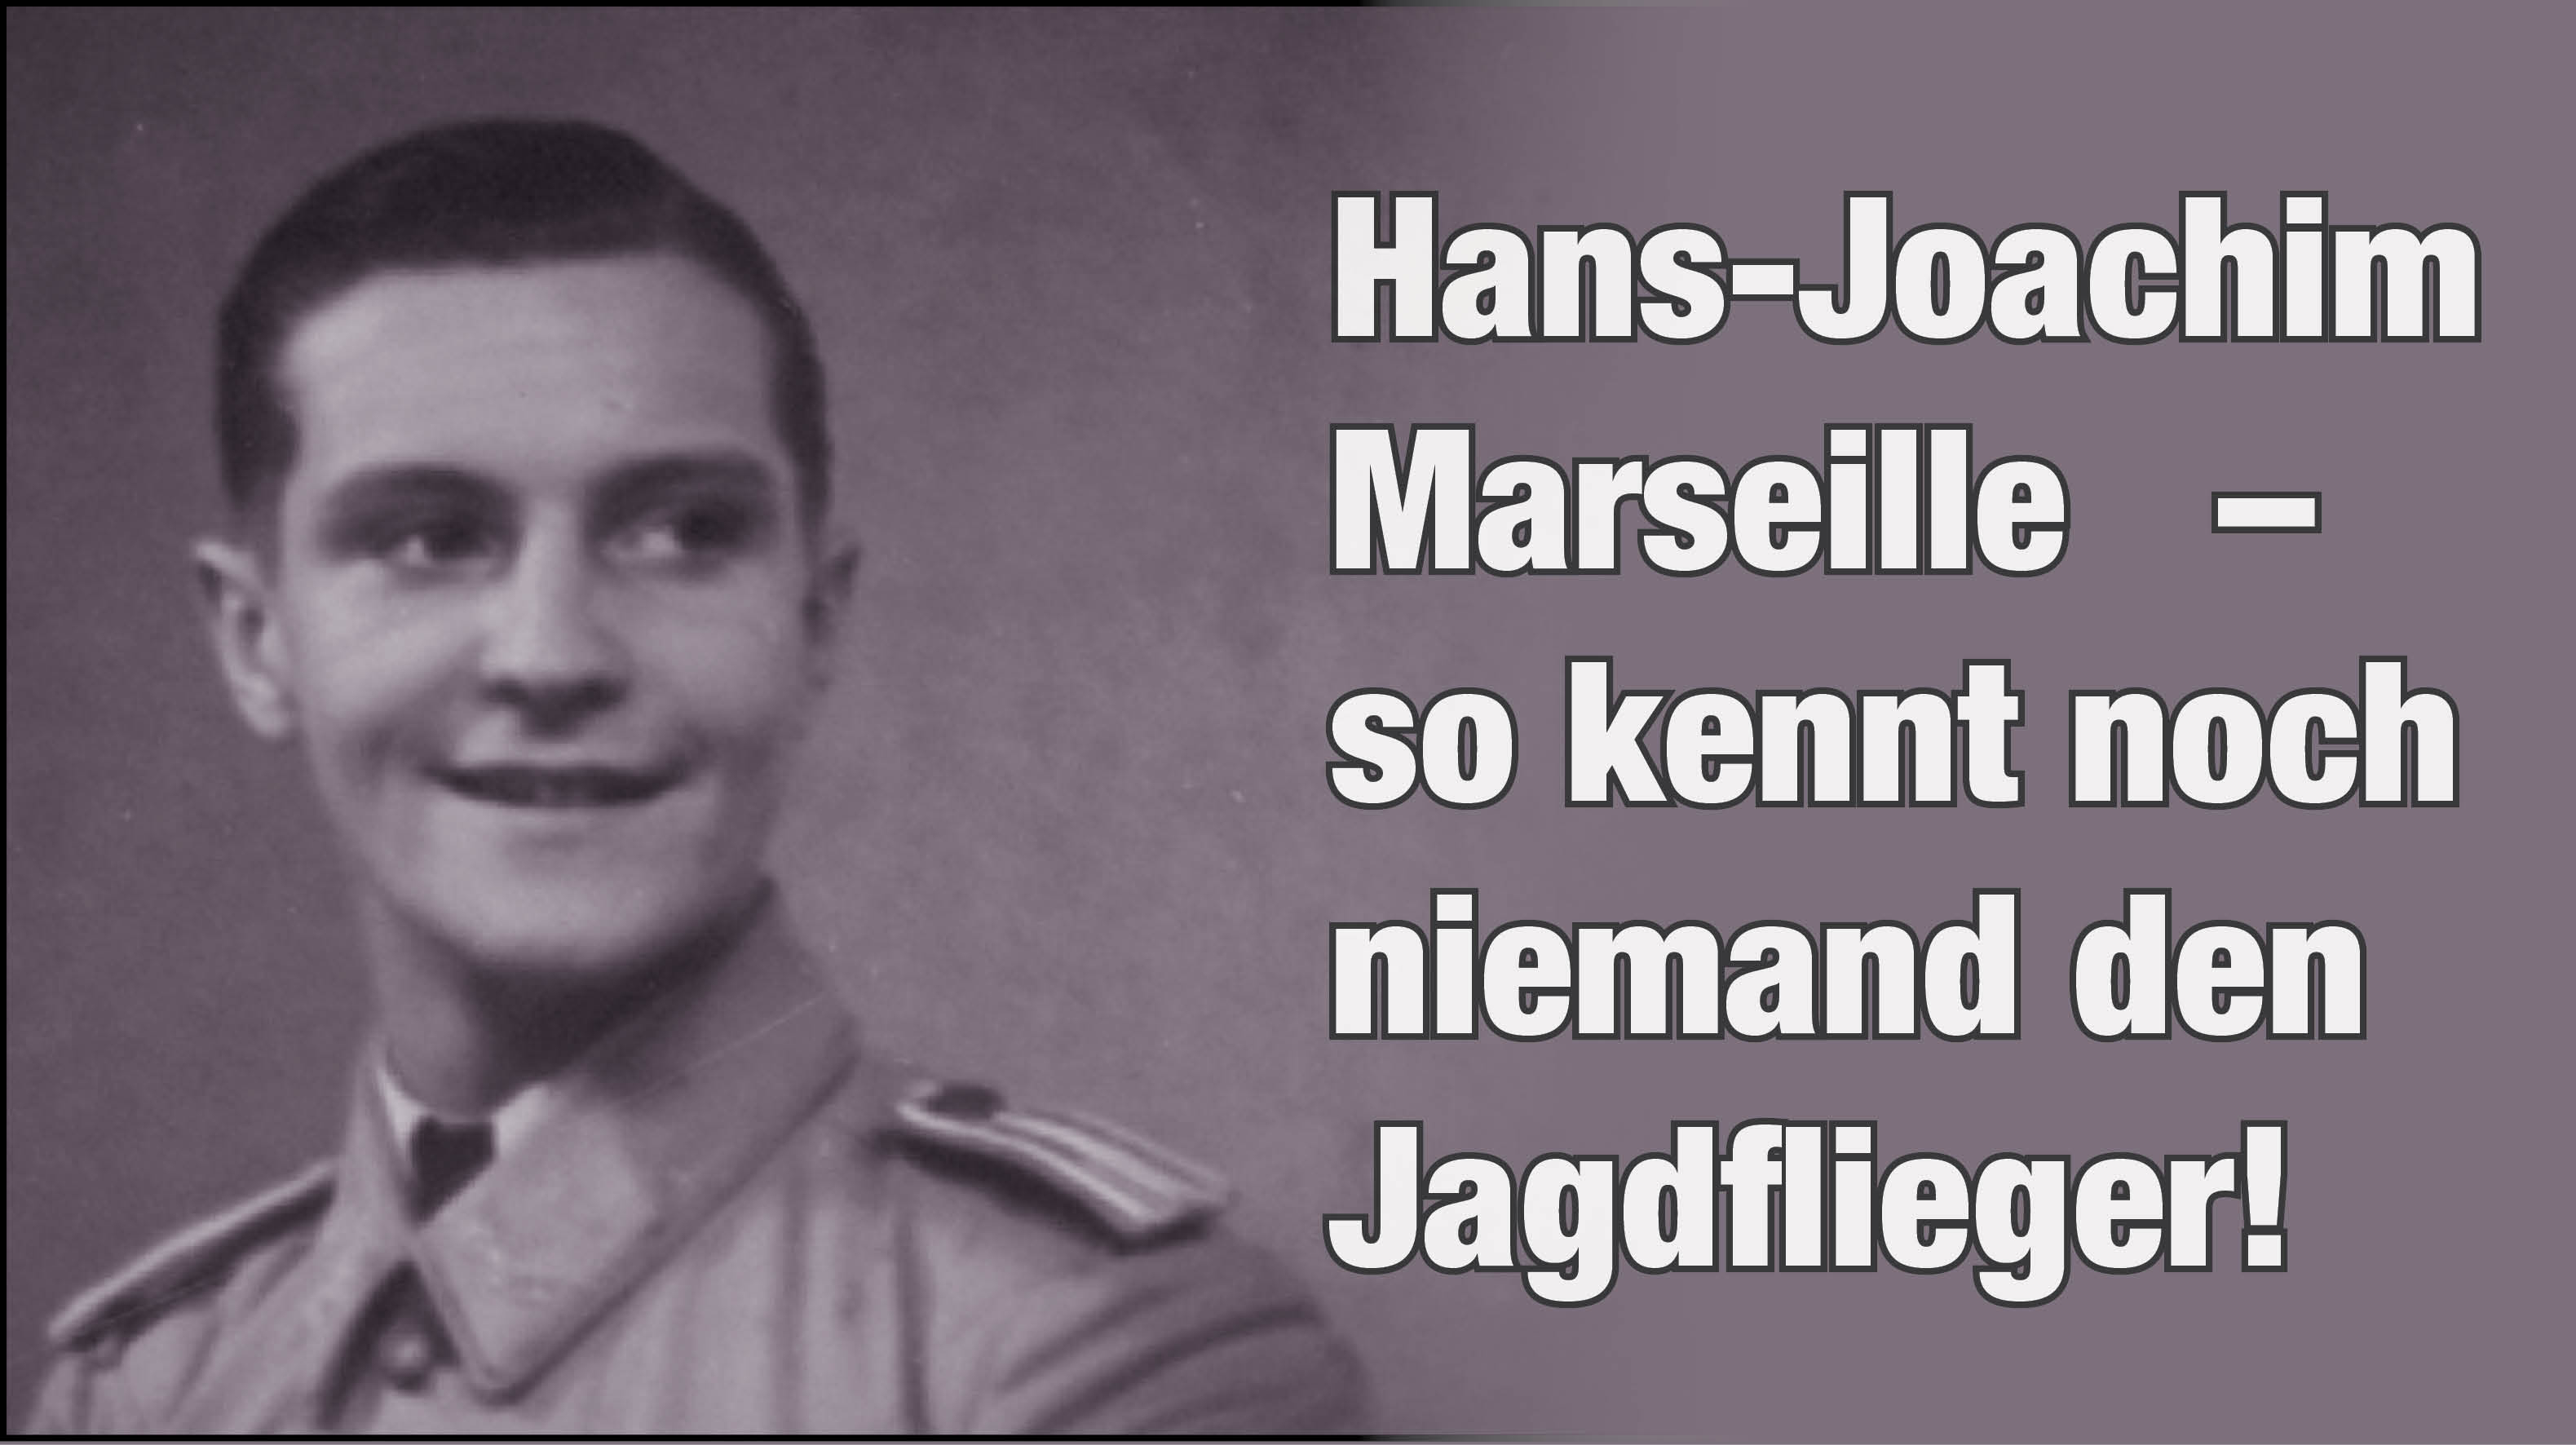 Hans-Joachim Marseille - The facts about the fighter pilot (in german language)